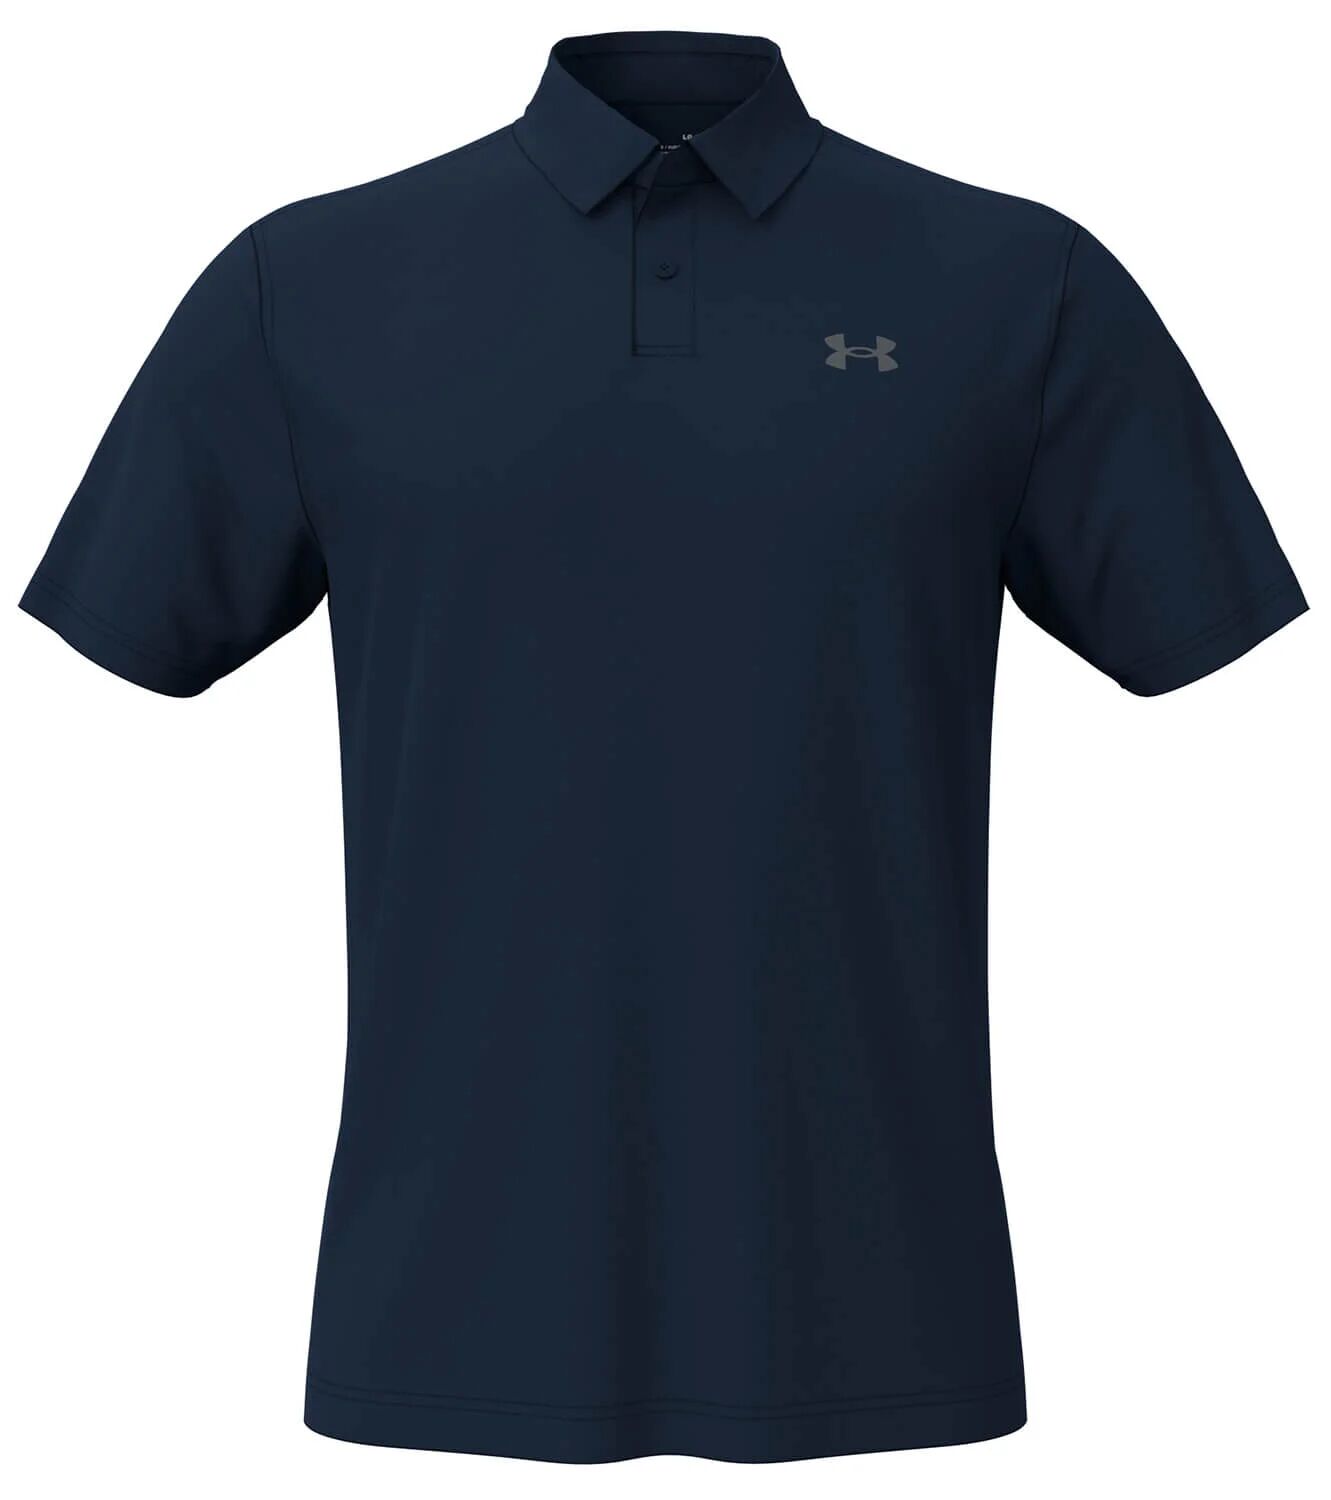 Under Armour T2G Men's Golf Polo Shirt - Blue, Size: Small